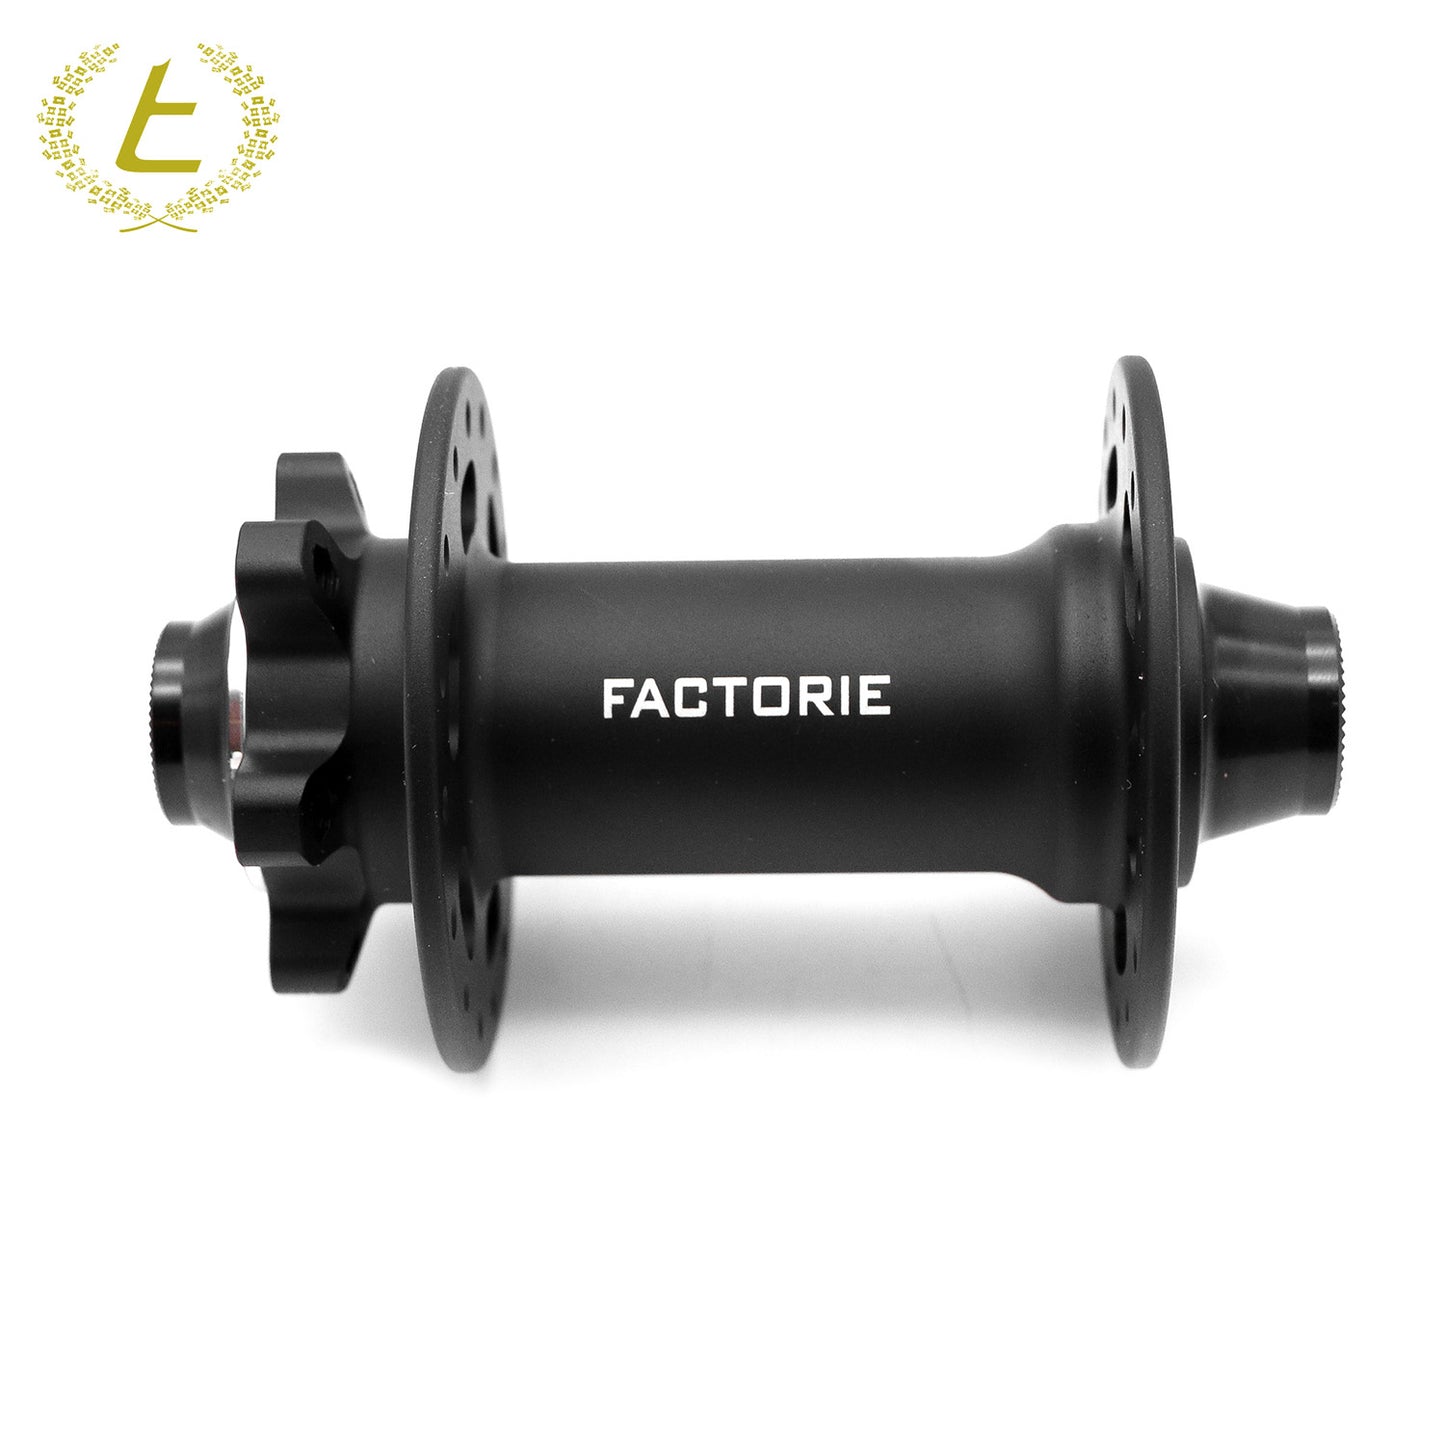 Traction Factorie Hub Set, Boosted Microspline 32H - Black